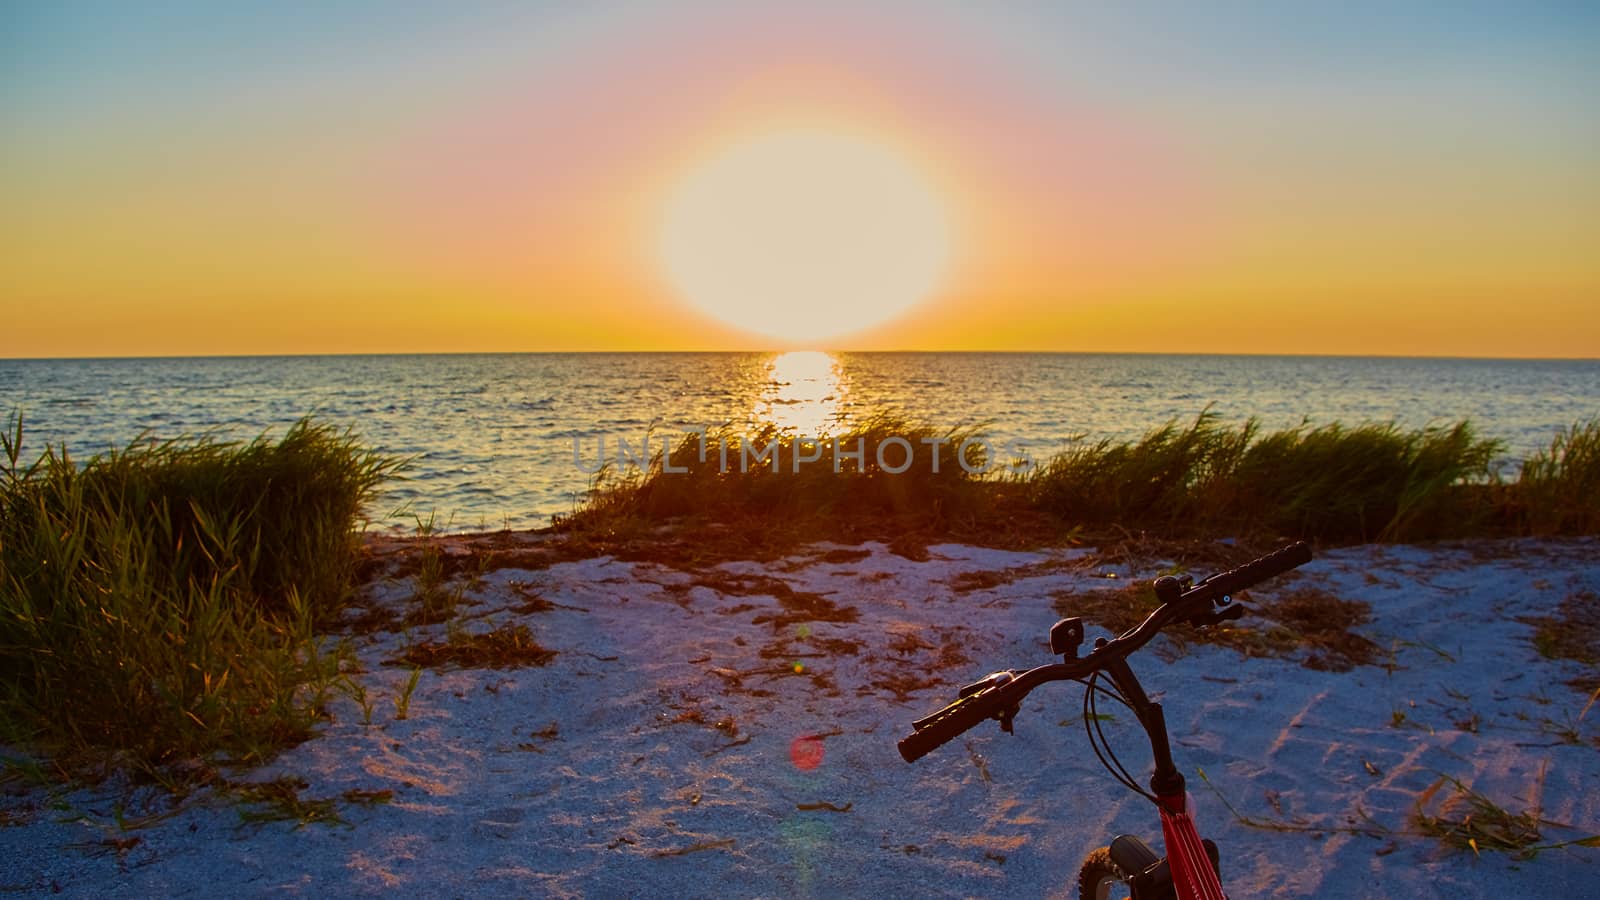 Bicycle at the beach on twilight time